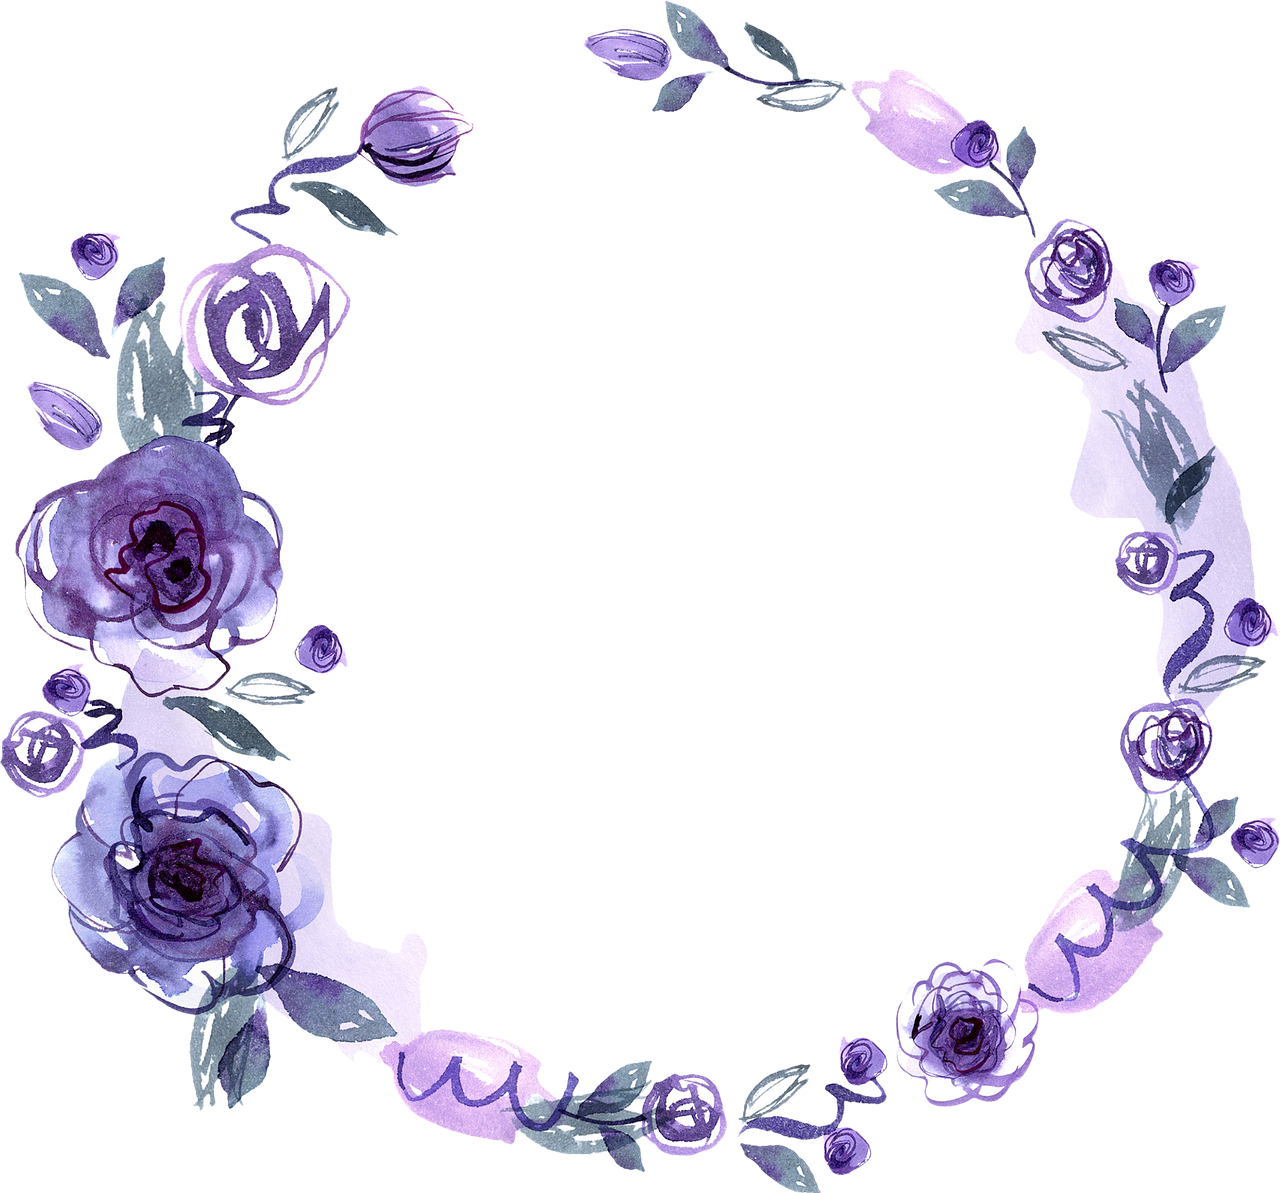 a round frame with purple flowers and leaves, a watercolor painting, sōsaku hanga, 4 k post, purple and black color scheme, roses, more dark purple color scheme